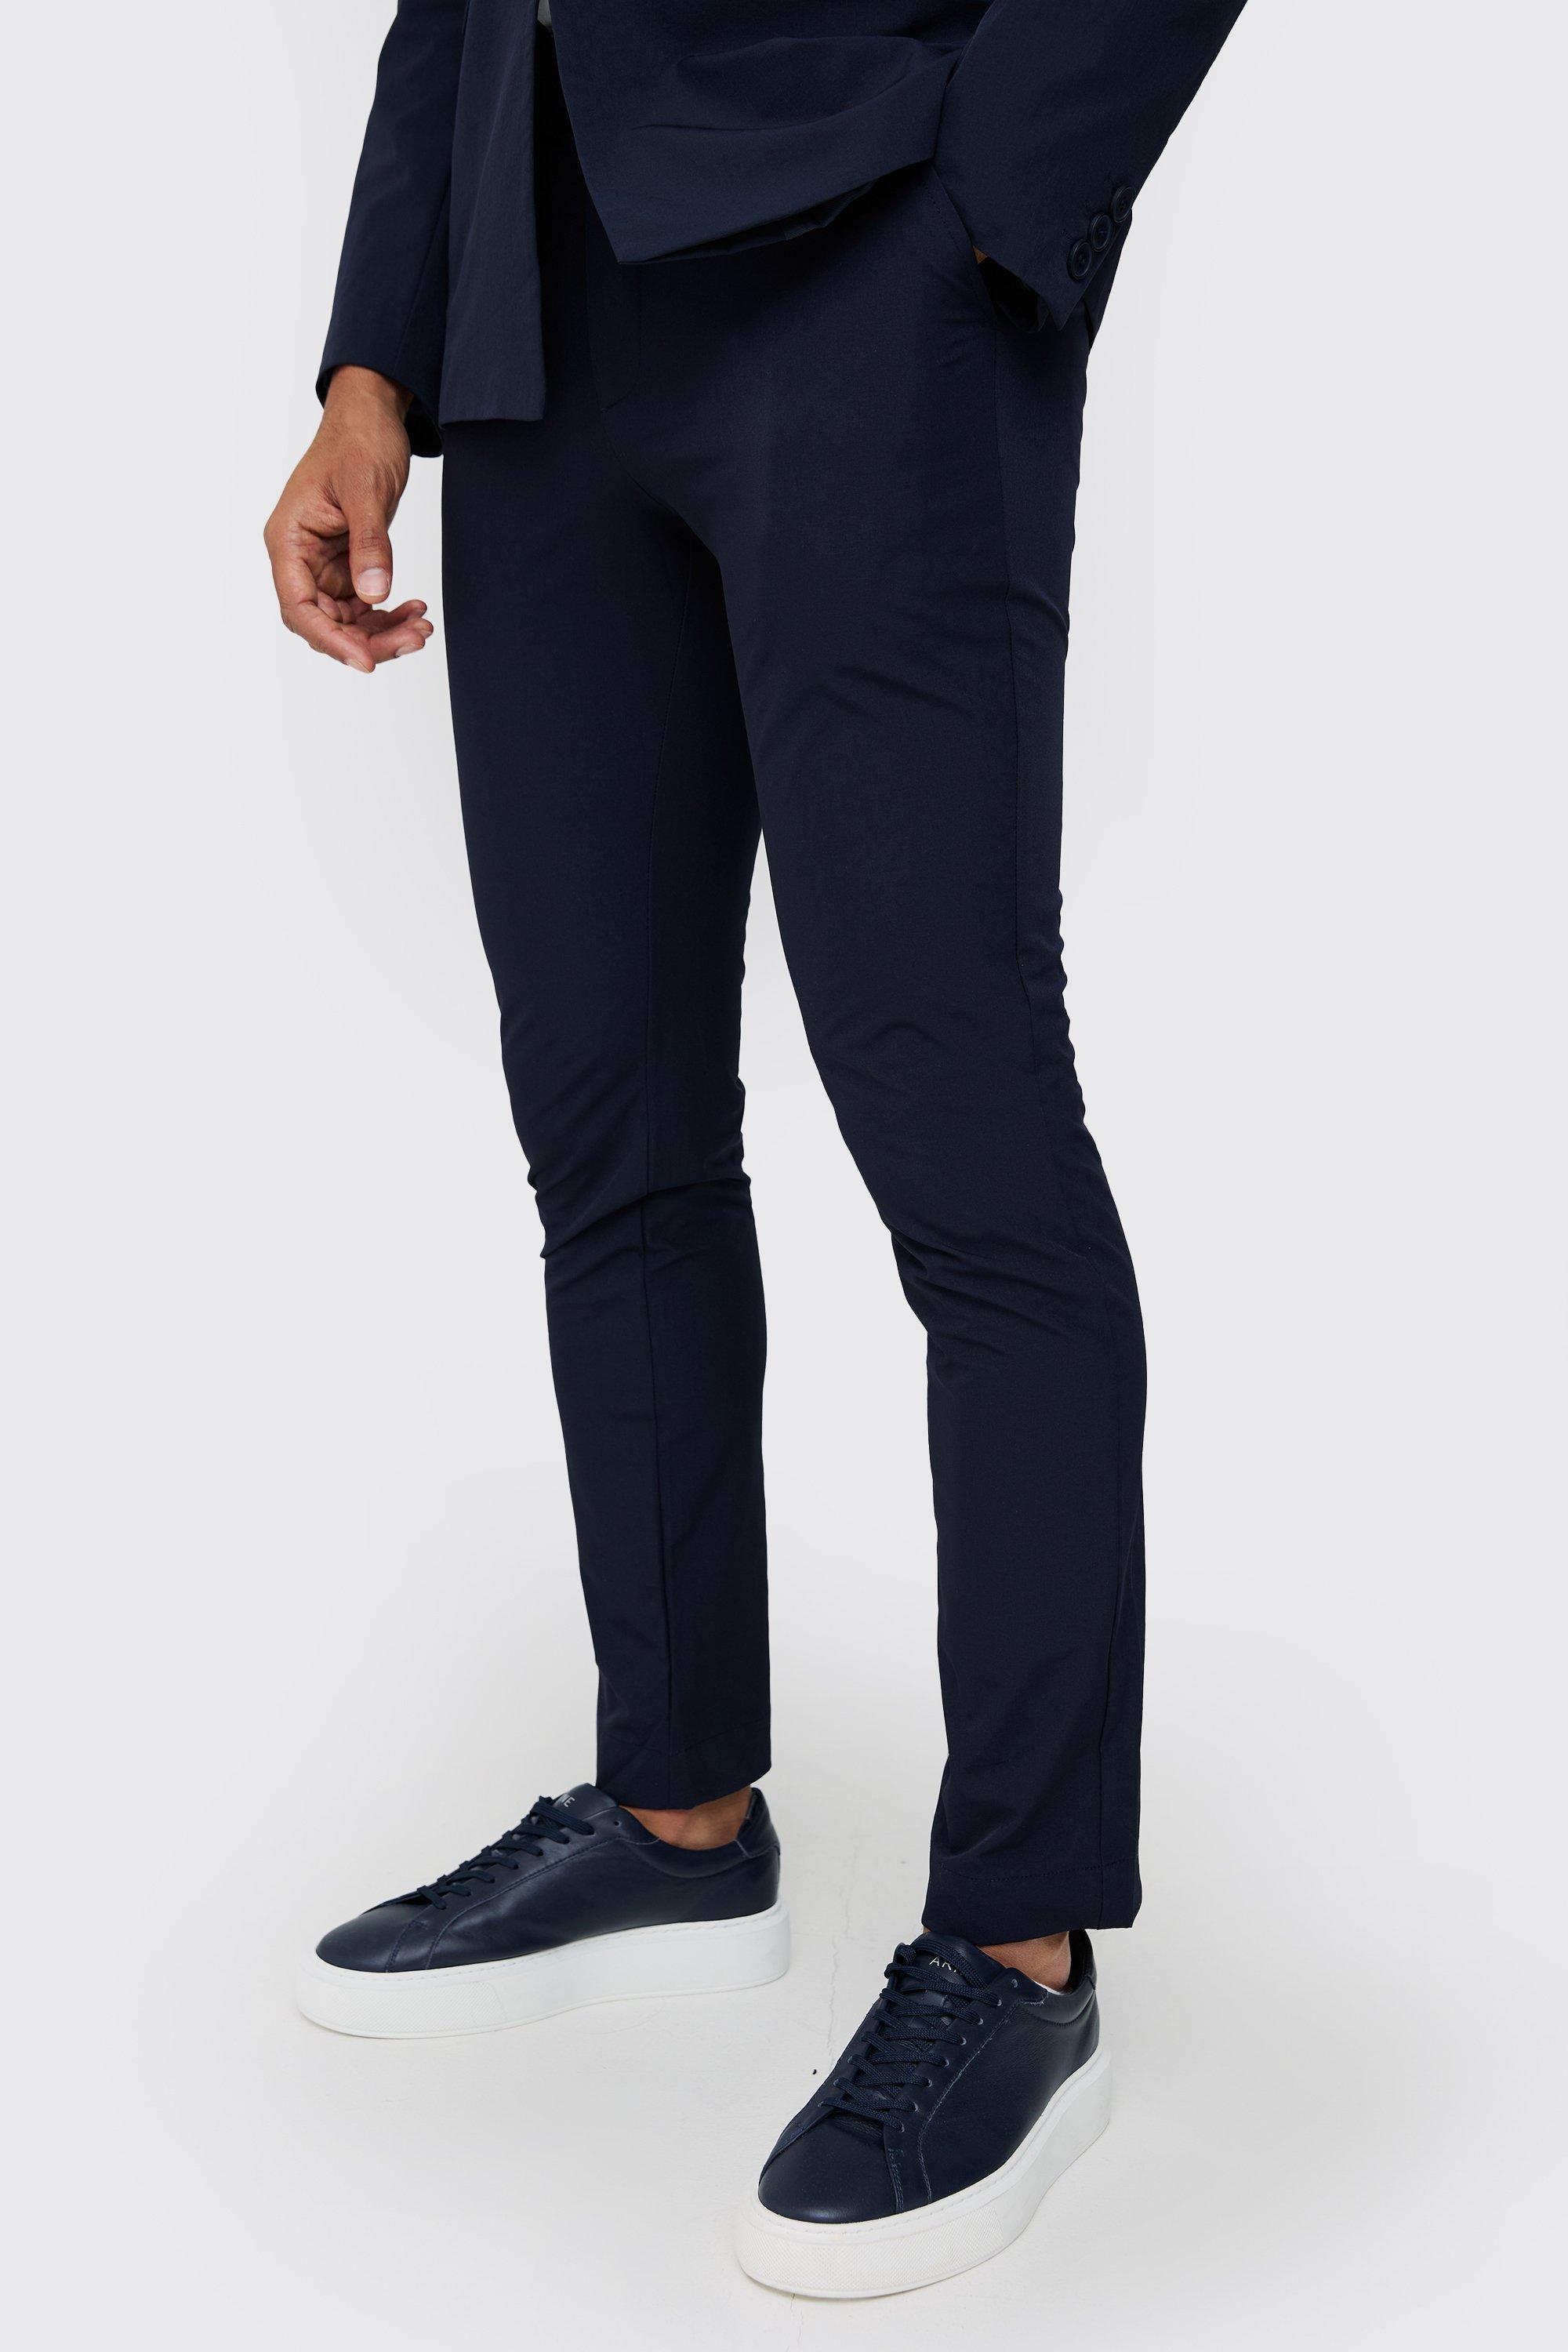 Mens Navy Stretch Tailored Slim Fit Trousers, Navy